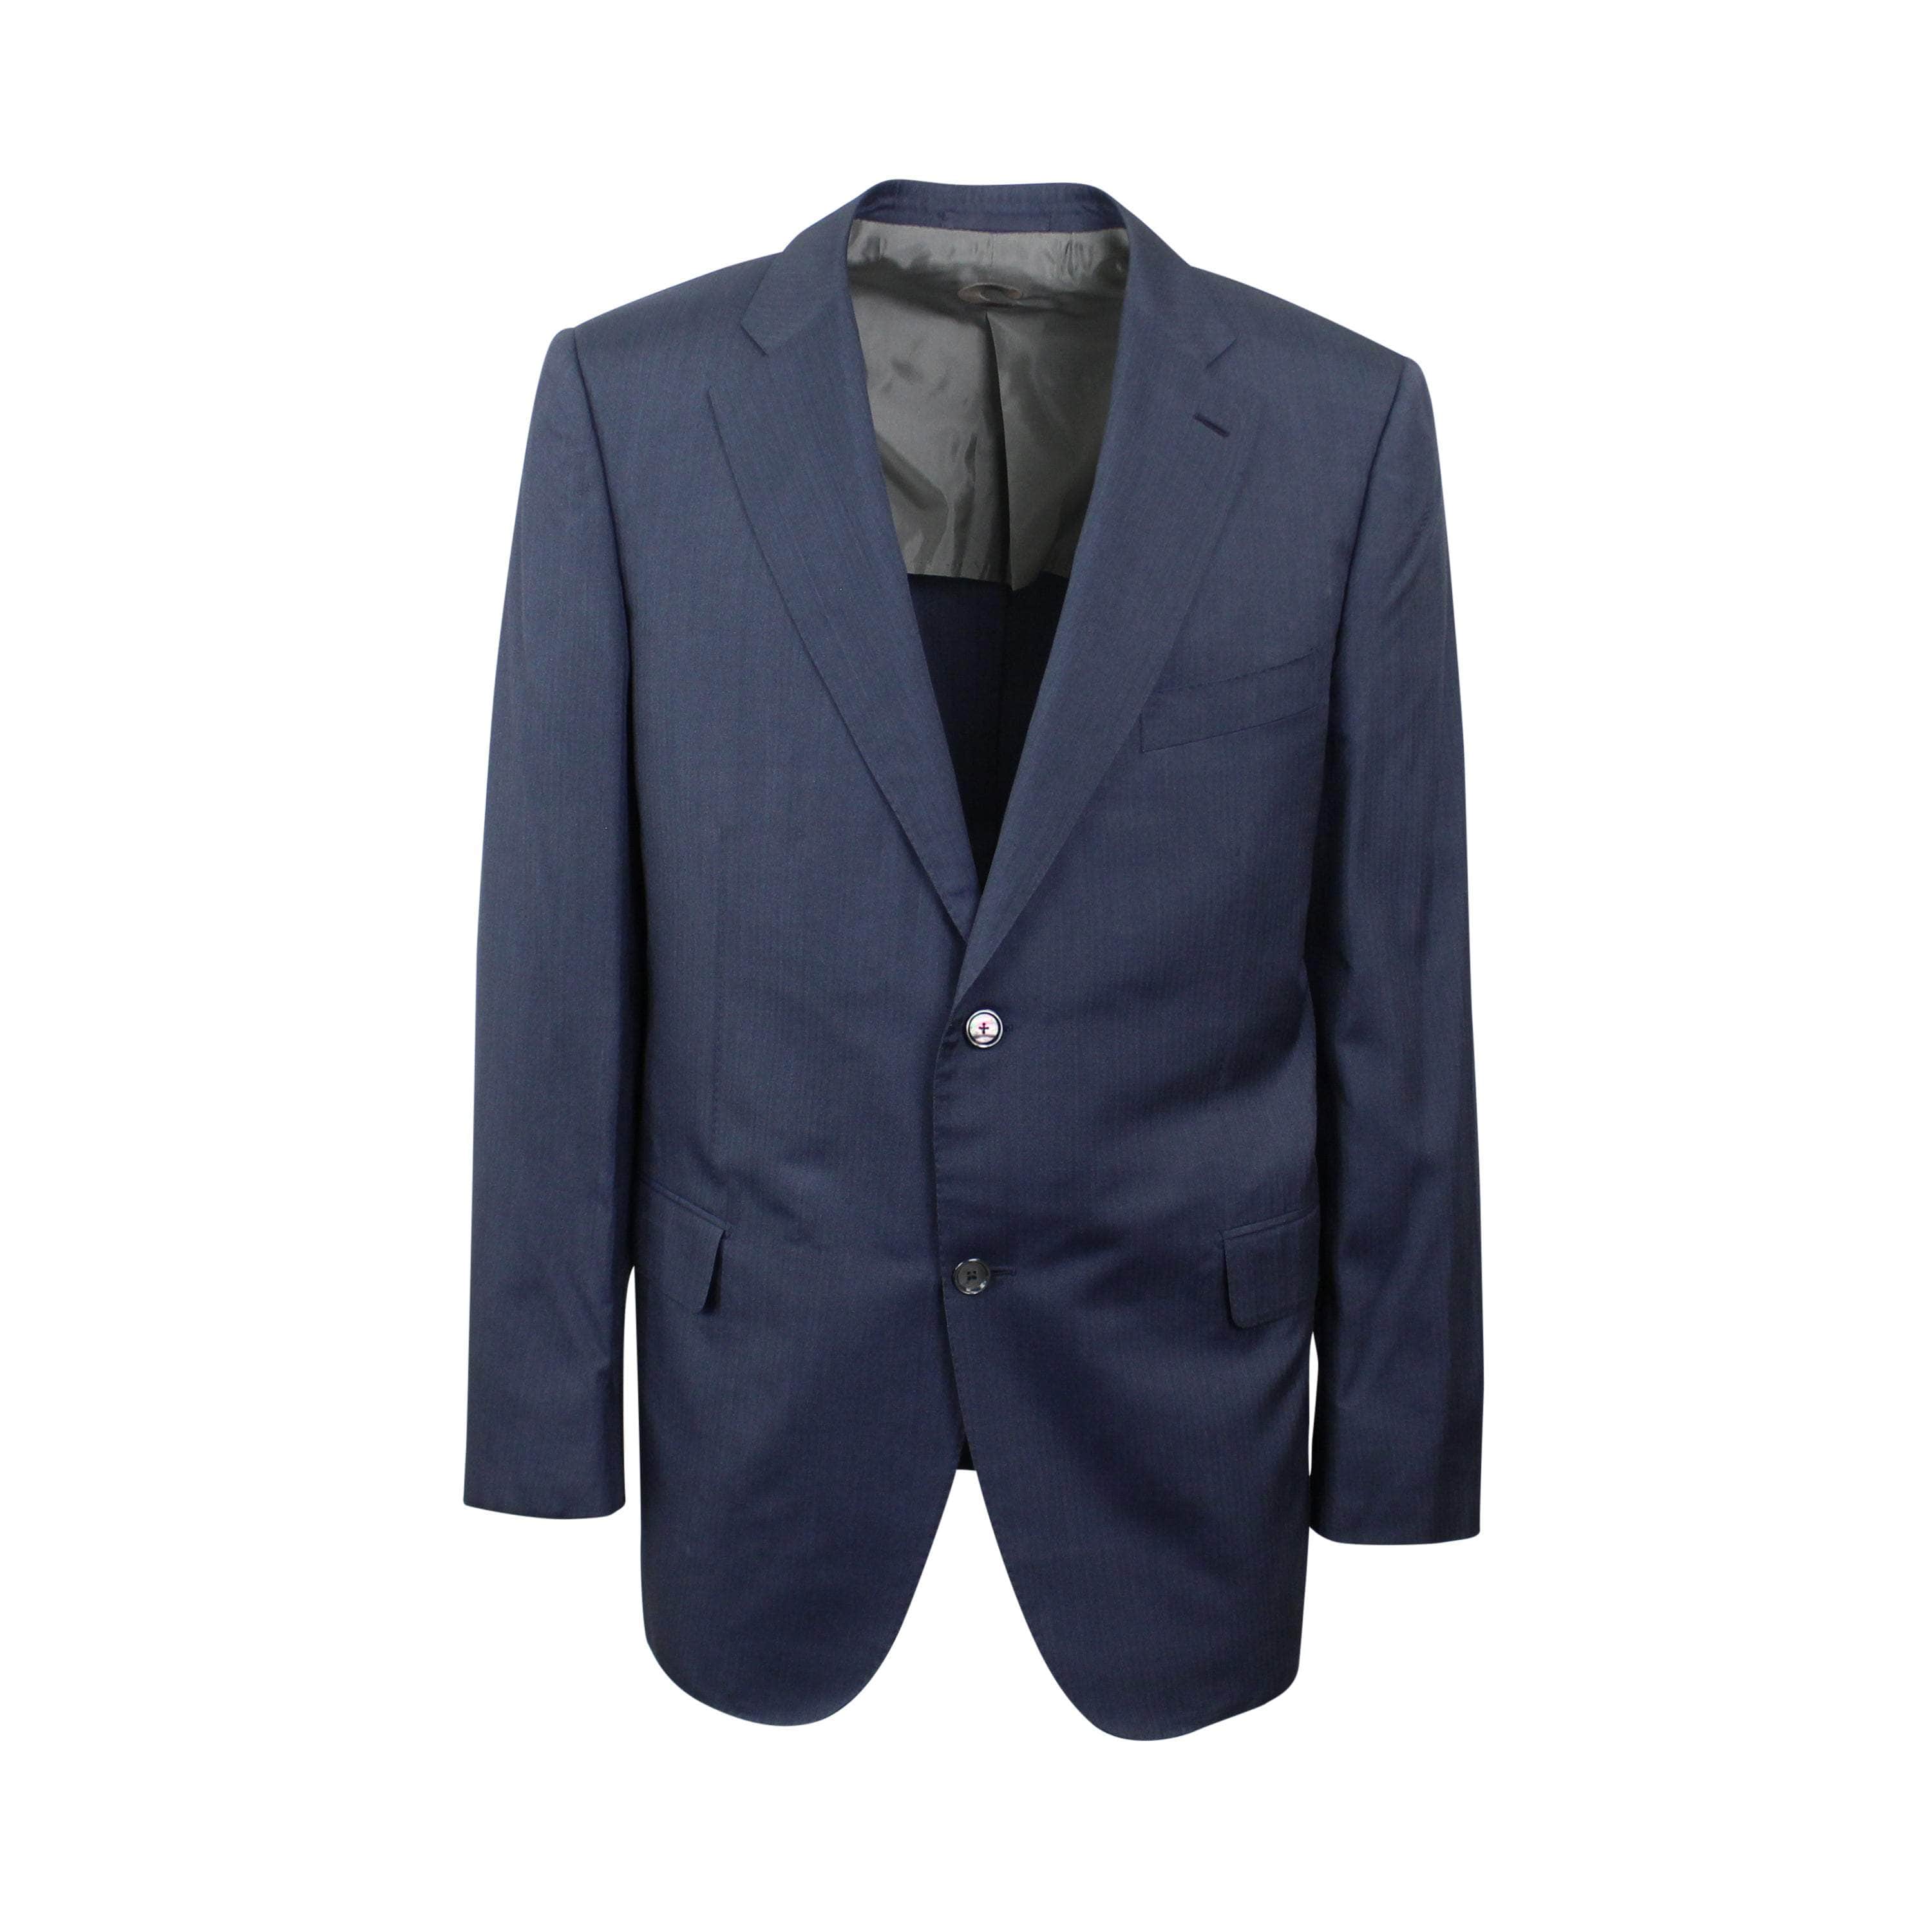 Caruso 750-1000, caruso, channelenable-all, chicmi, couponcollection, main-clothing, shop375, size-56, Stadium Goods 56 Navy Blue Single Breasted Silk Suit 6R CRS-XTPS-0191/56 CRS-XTPS-0191/56